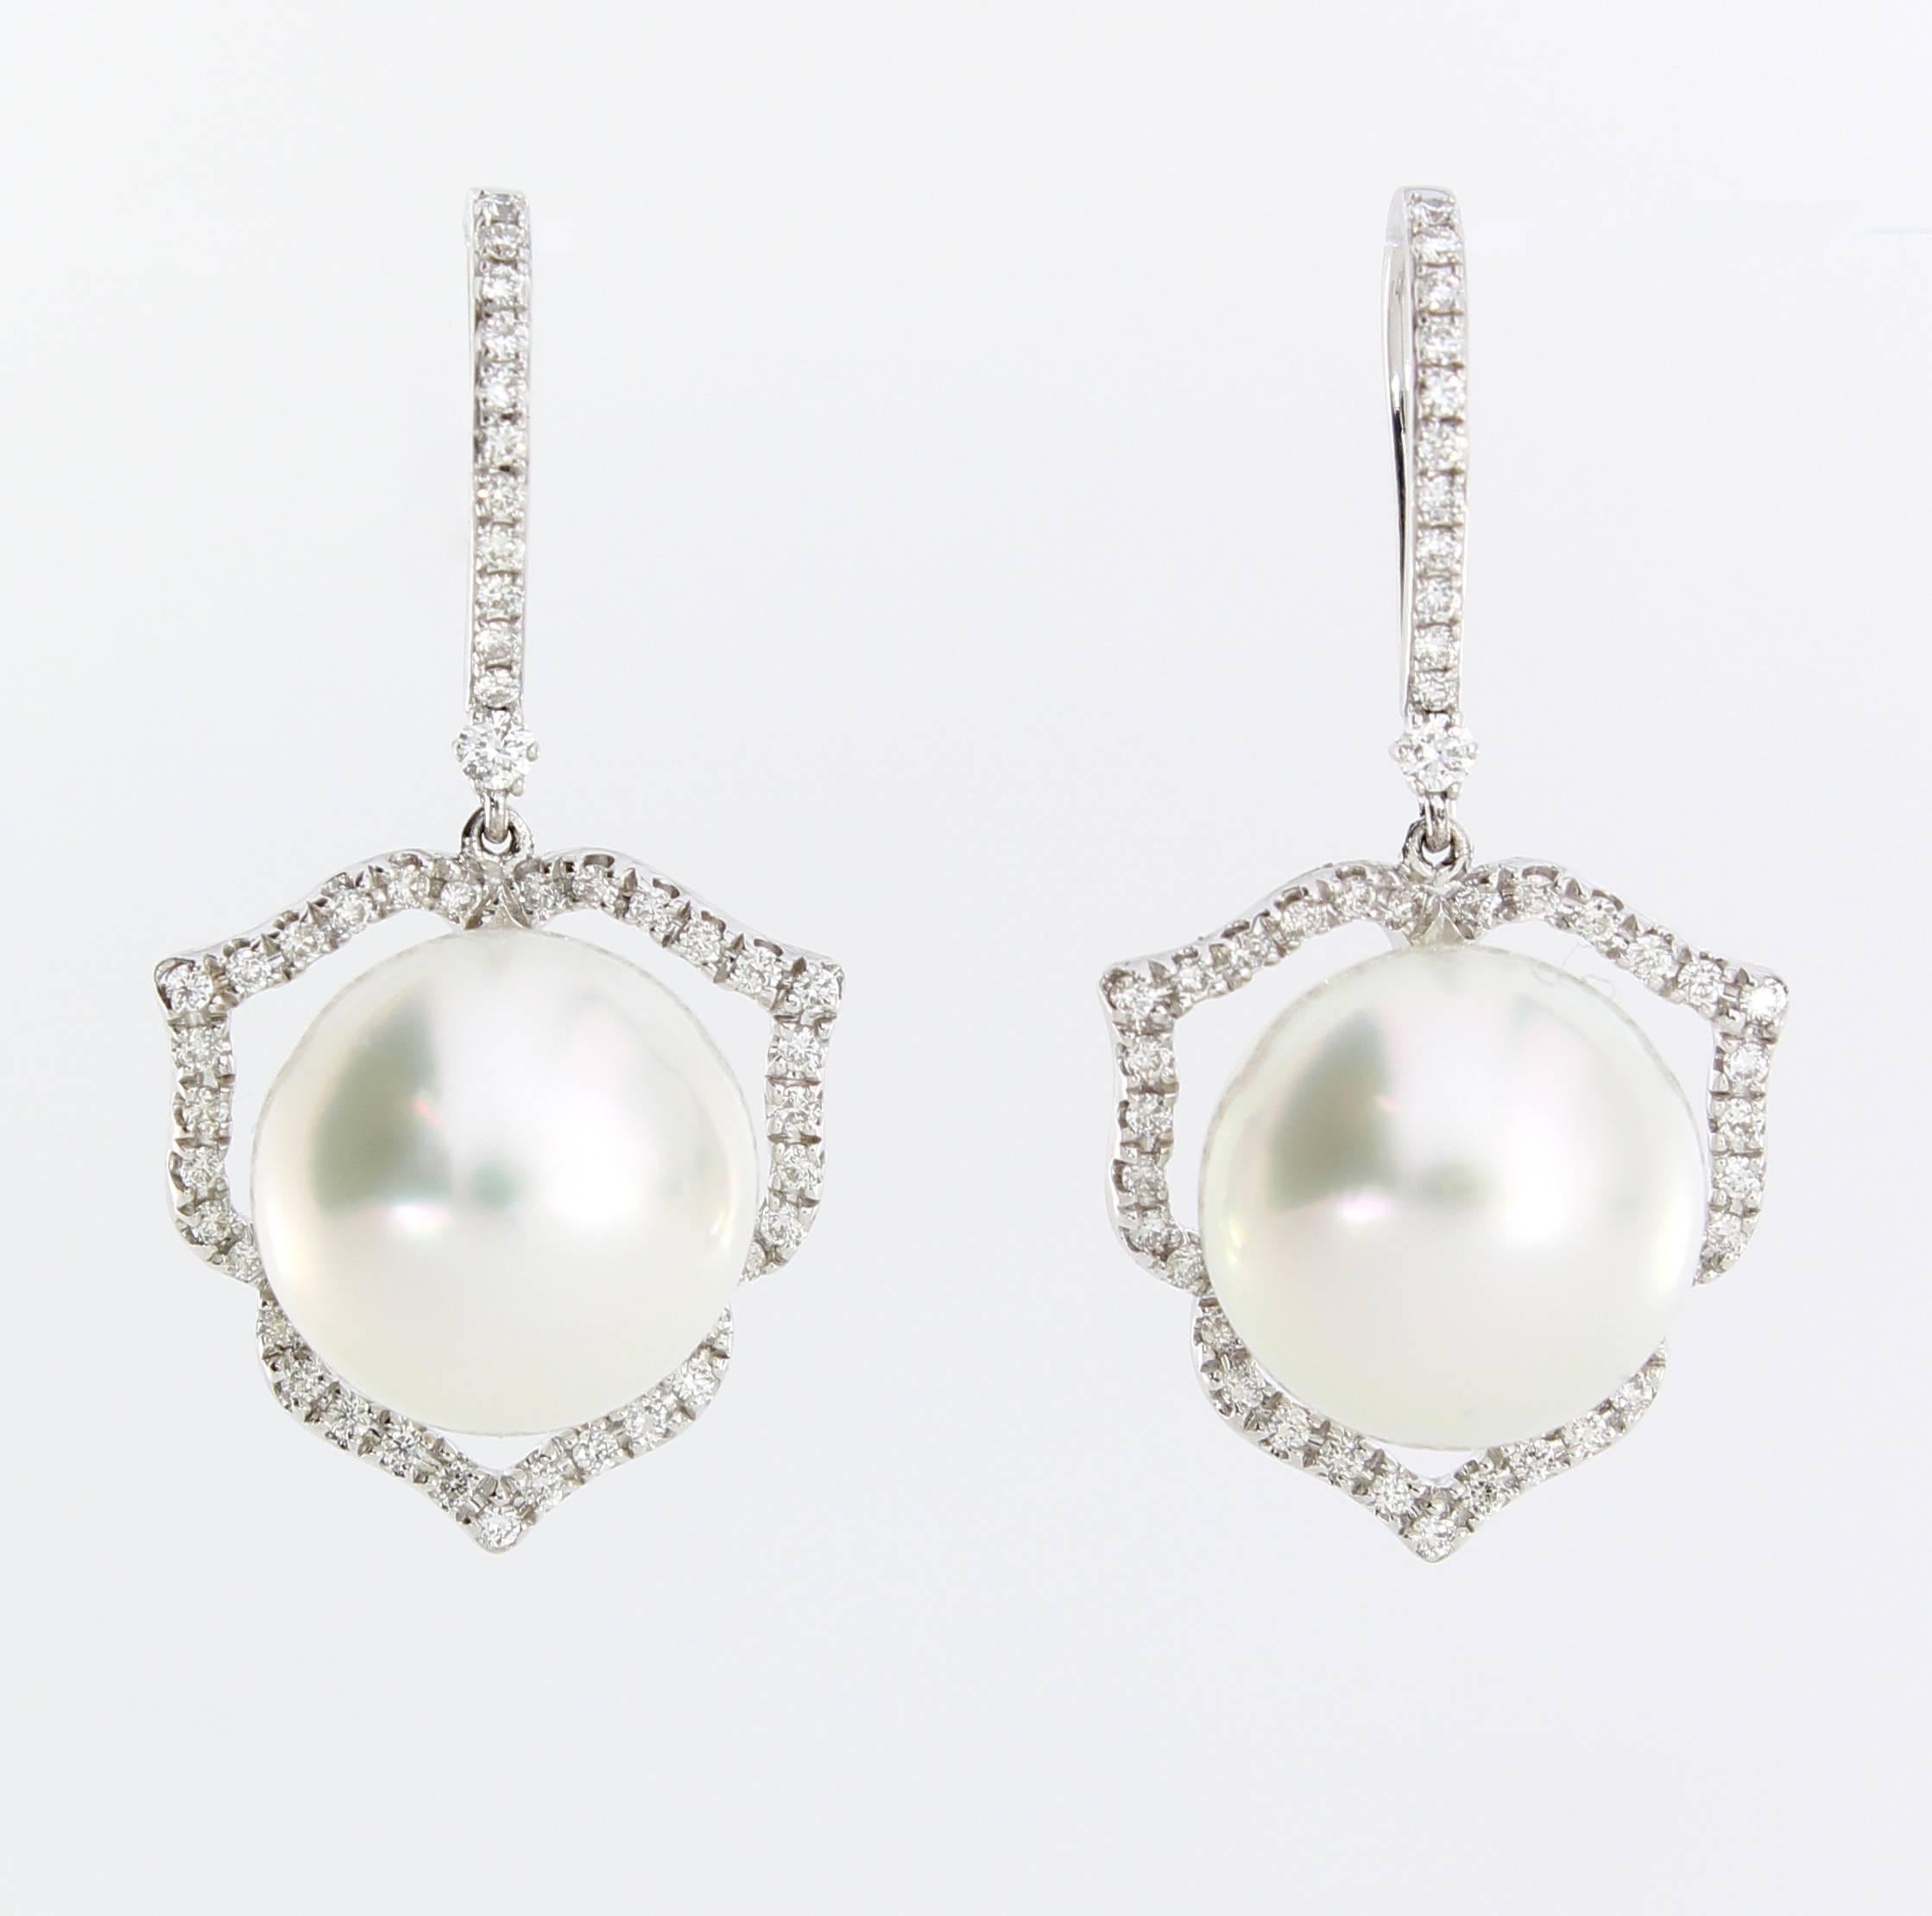 The 3 Point Earrings are from the AUTORE Timeless Collection. 
This piece is crafted in 18k White Gold with White Diamonds (H SL1 0.55ct Round Brilliant) and 12mm White High Button South Sea Pearls. 